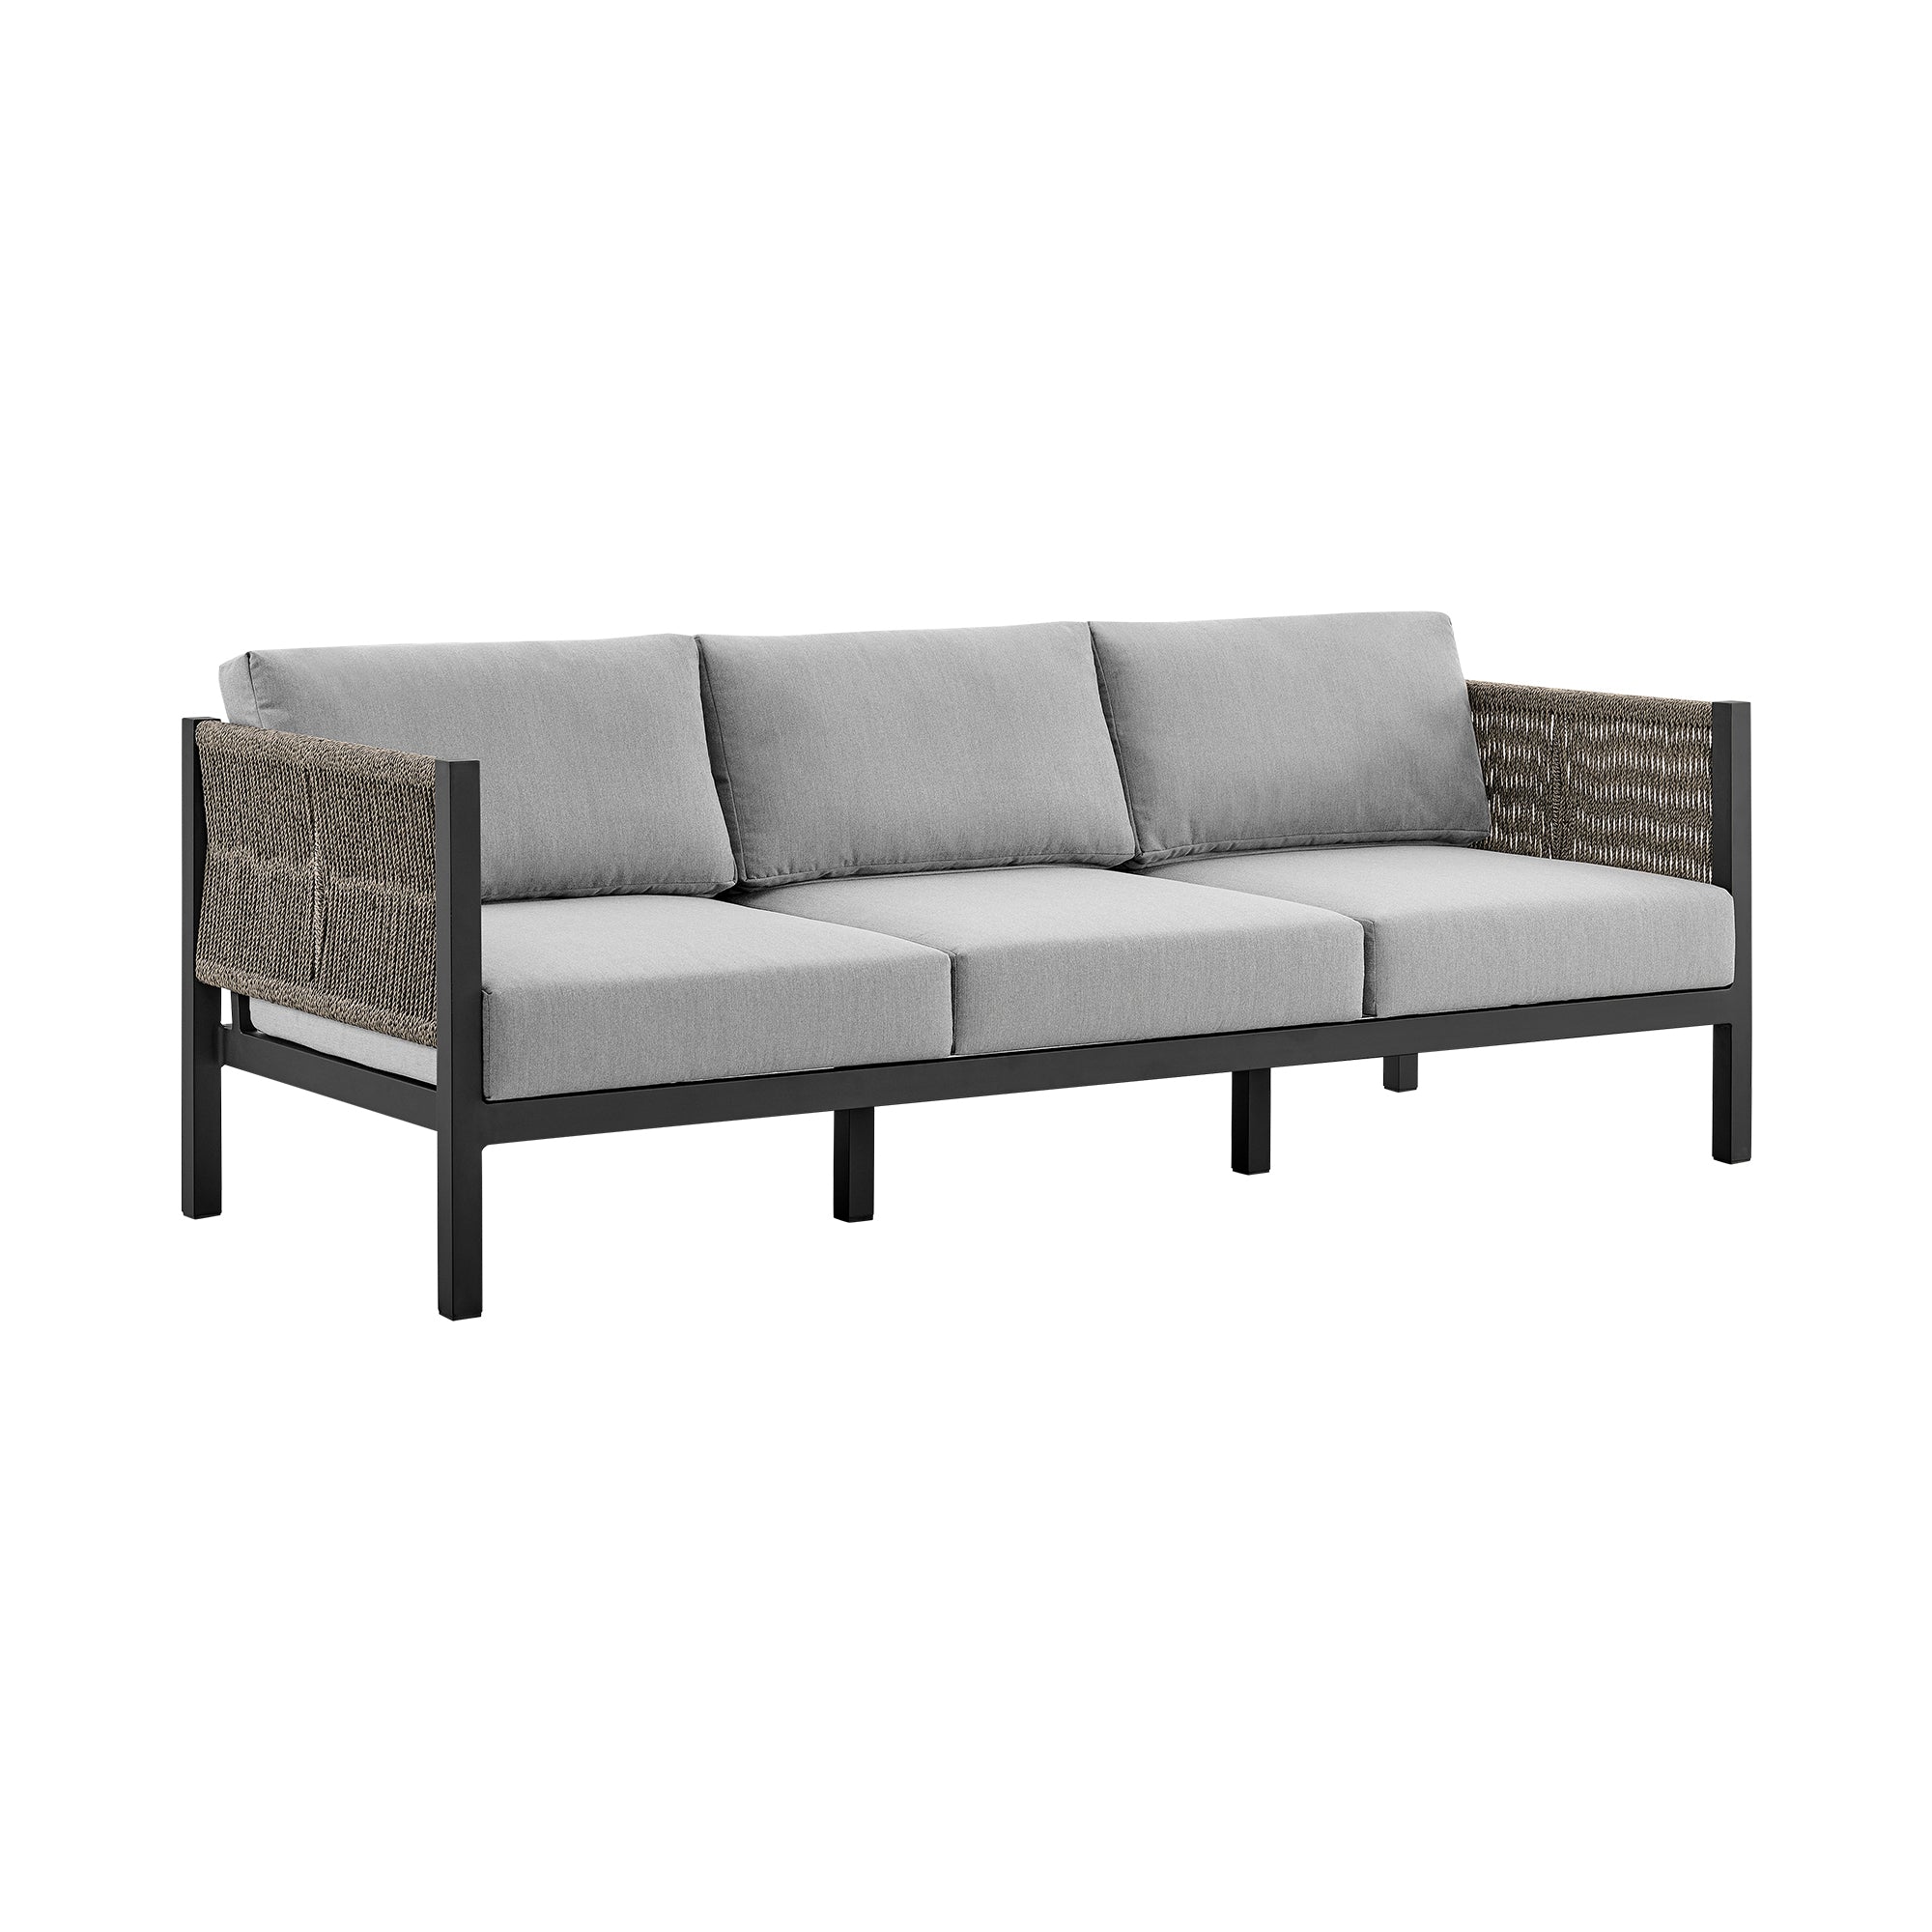 Armen Living - Cuffay 4 Piece Outdoor Patio Furniture Set in Aluminum and Rope with Cushions - 840254332447